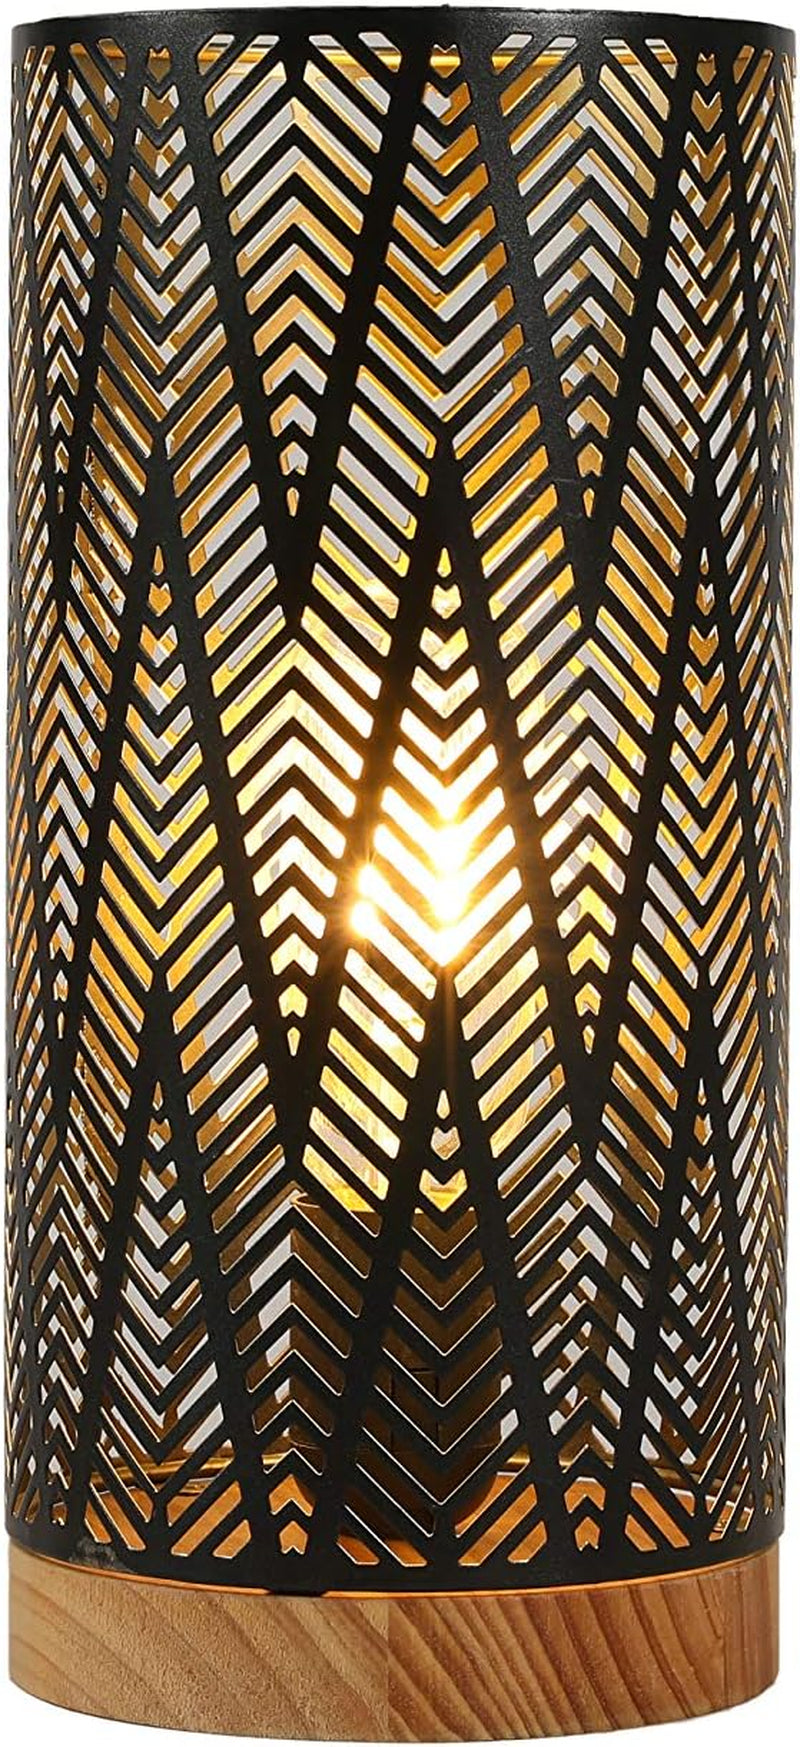 Metal Lamp Battery Powered 11''High Accent Cordless Lamp with LED Bulb Line Patterned Battery Lamp for Weddings Party Patio Garden Indoors Outdoors Table Balcony(With Wooden Base)